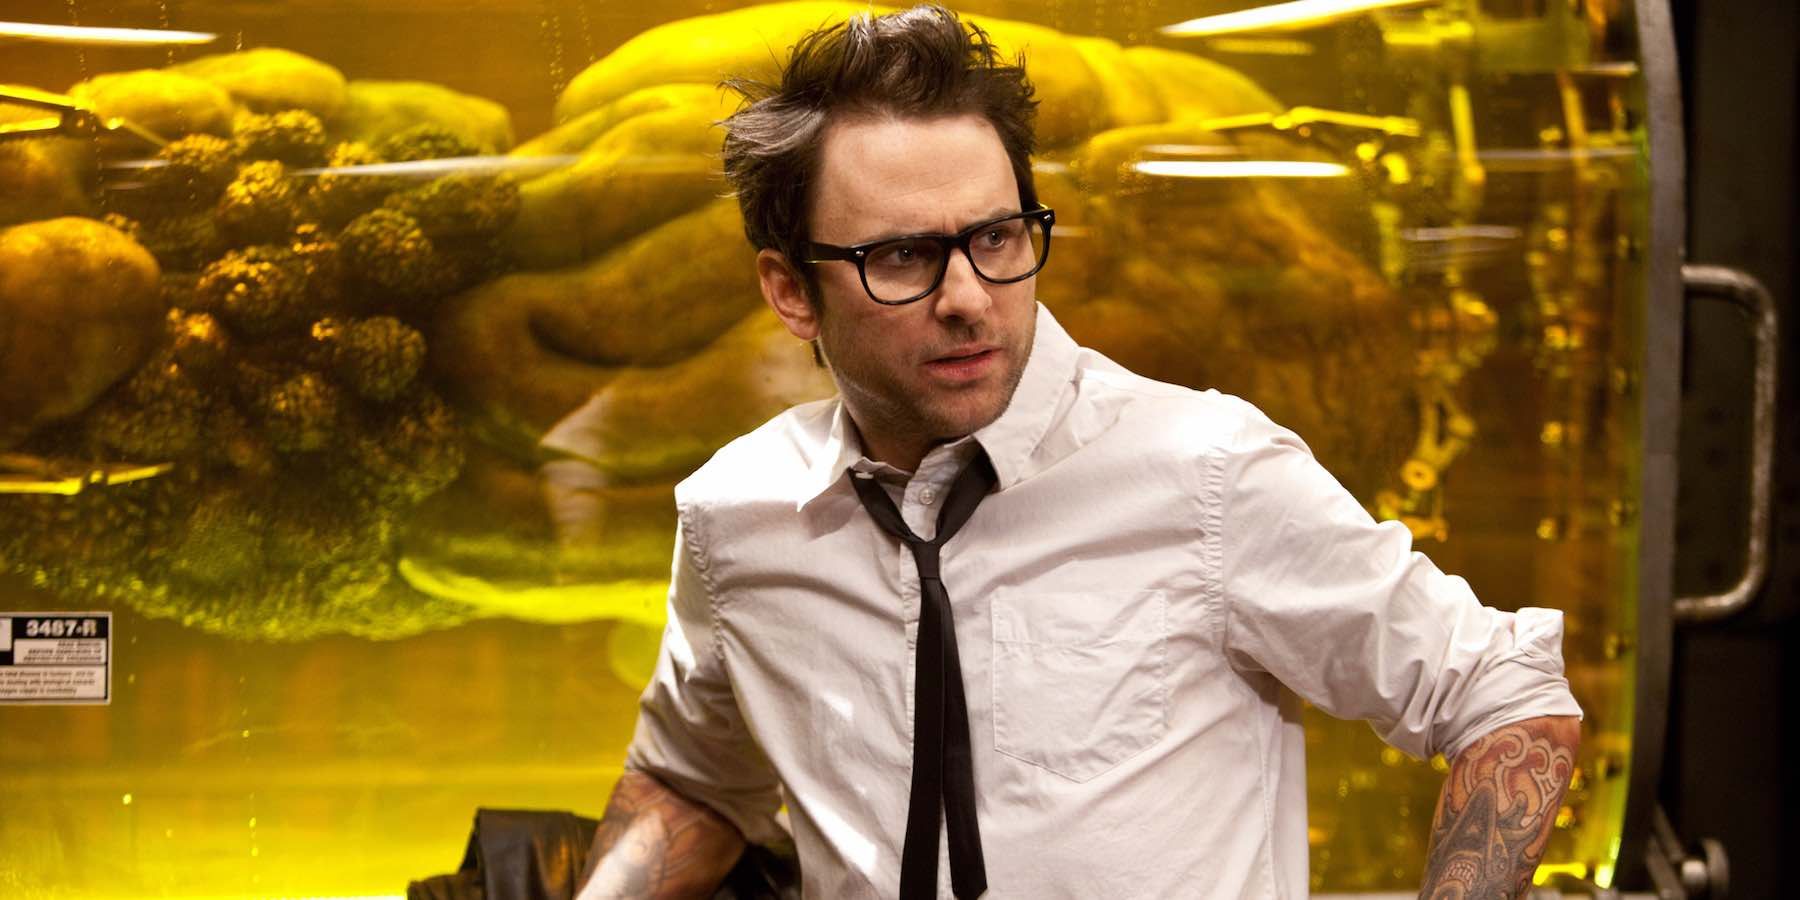 Charlie Day Interview: Pacific Rim Uprising